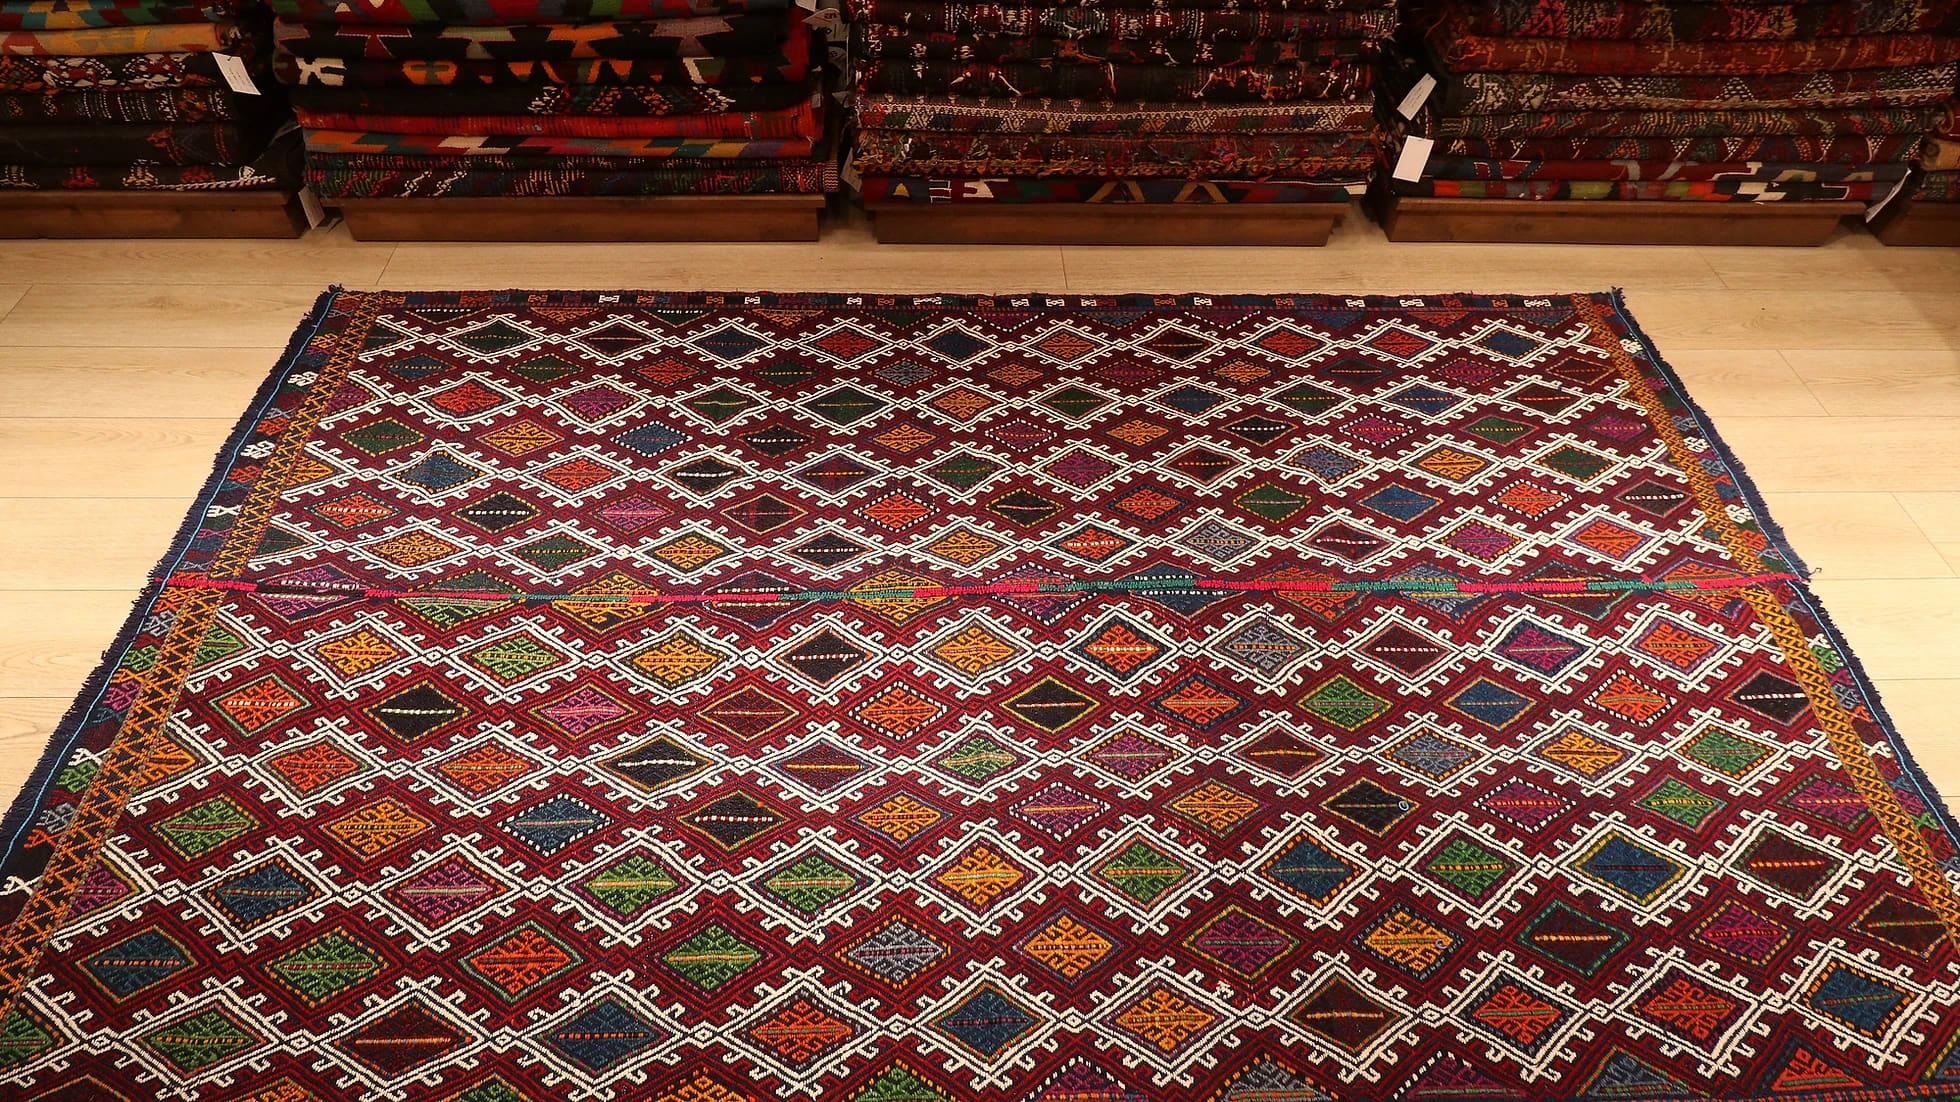 a perfect mid-century tribal Kurdish rug from Denizli, Turkey featuring traditional kilim motifs in muted and faded earth tones